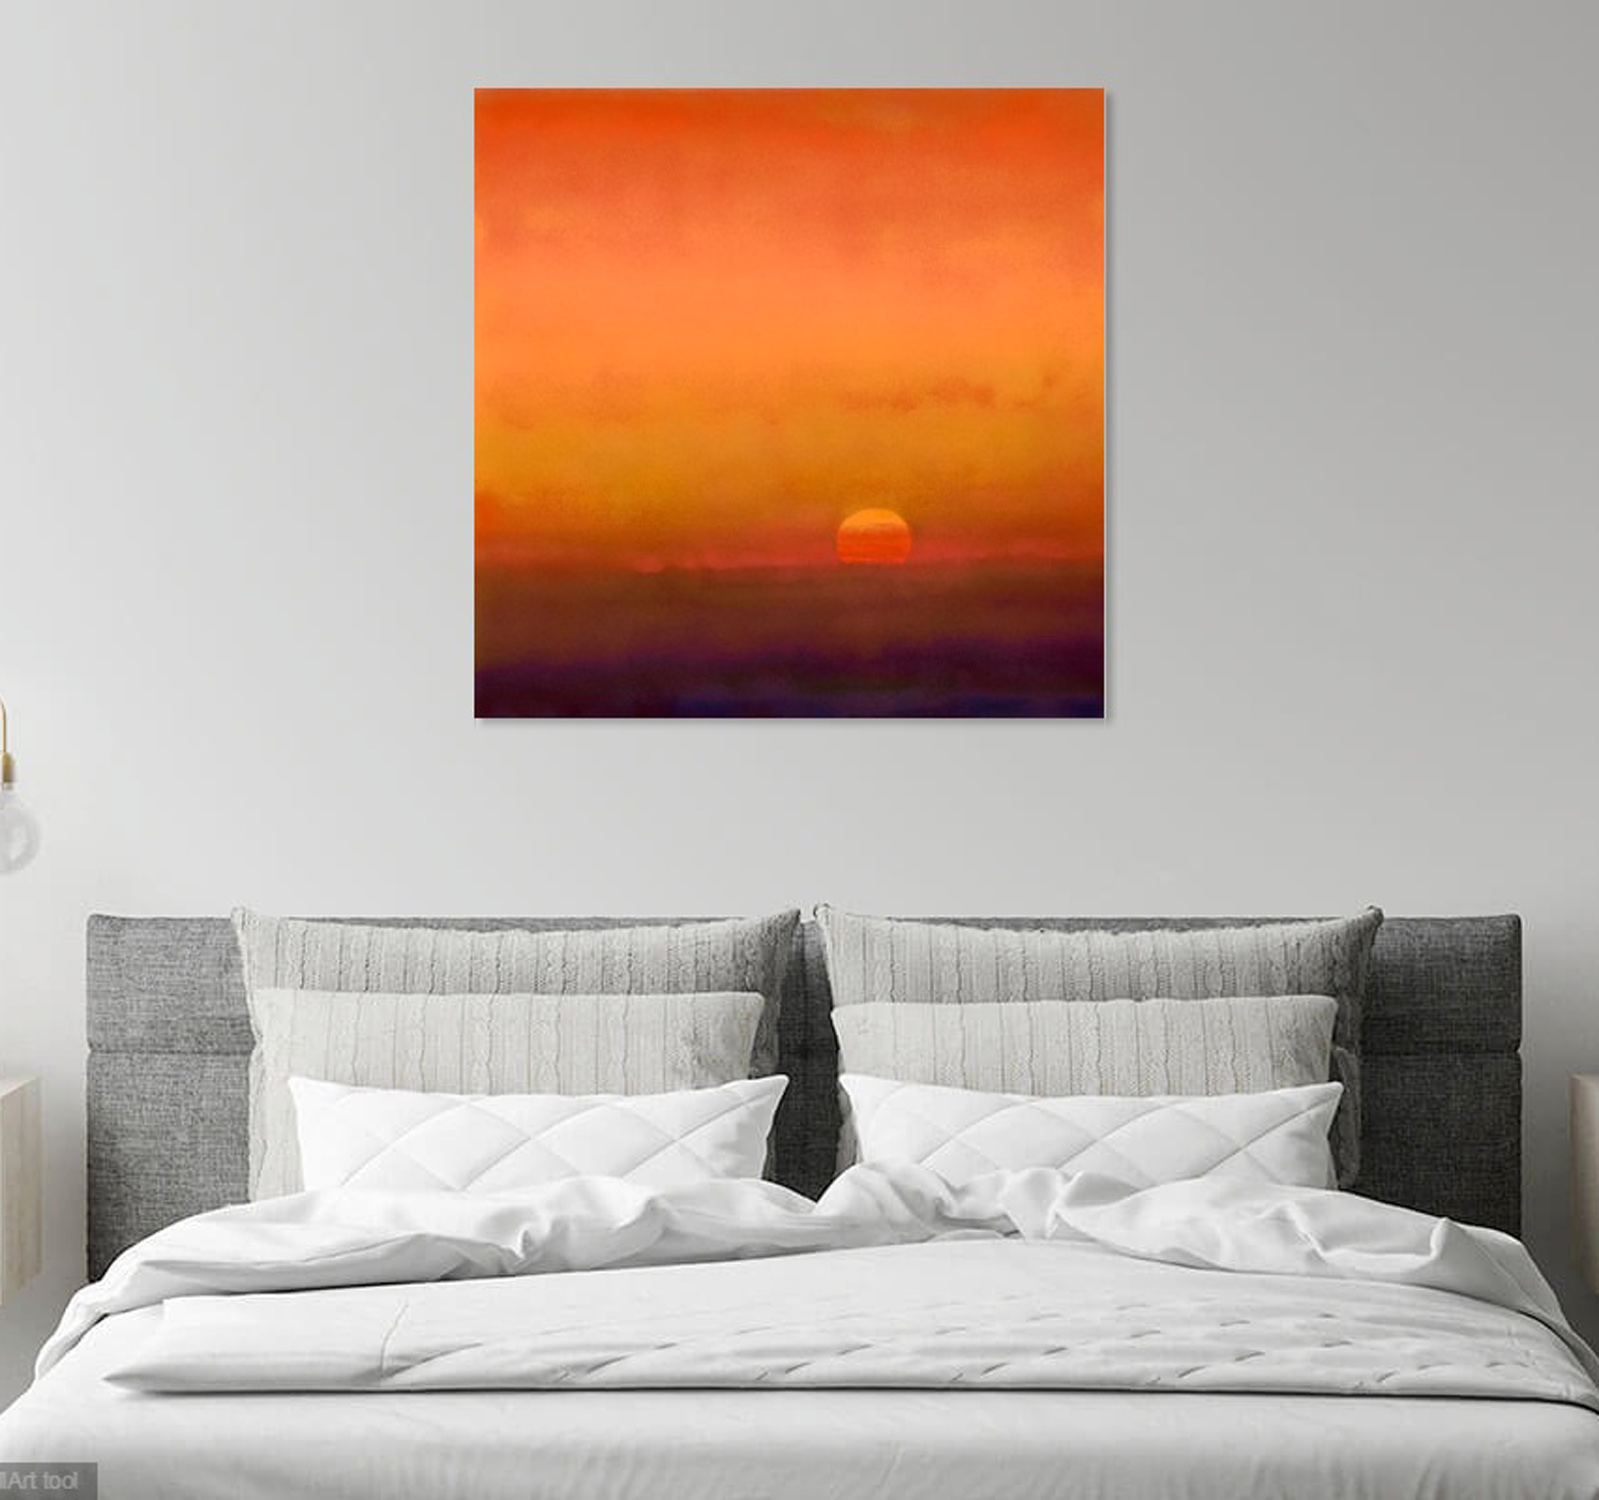 Large sunset painting 'Sunset at St Hippolyte' by John O'Grady displayed above a bed